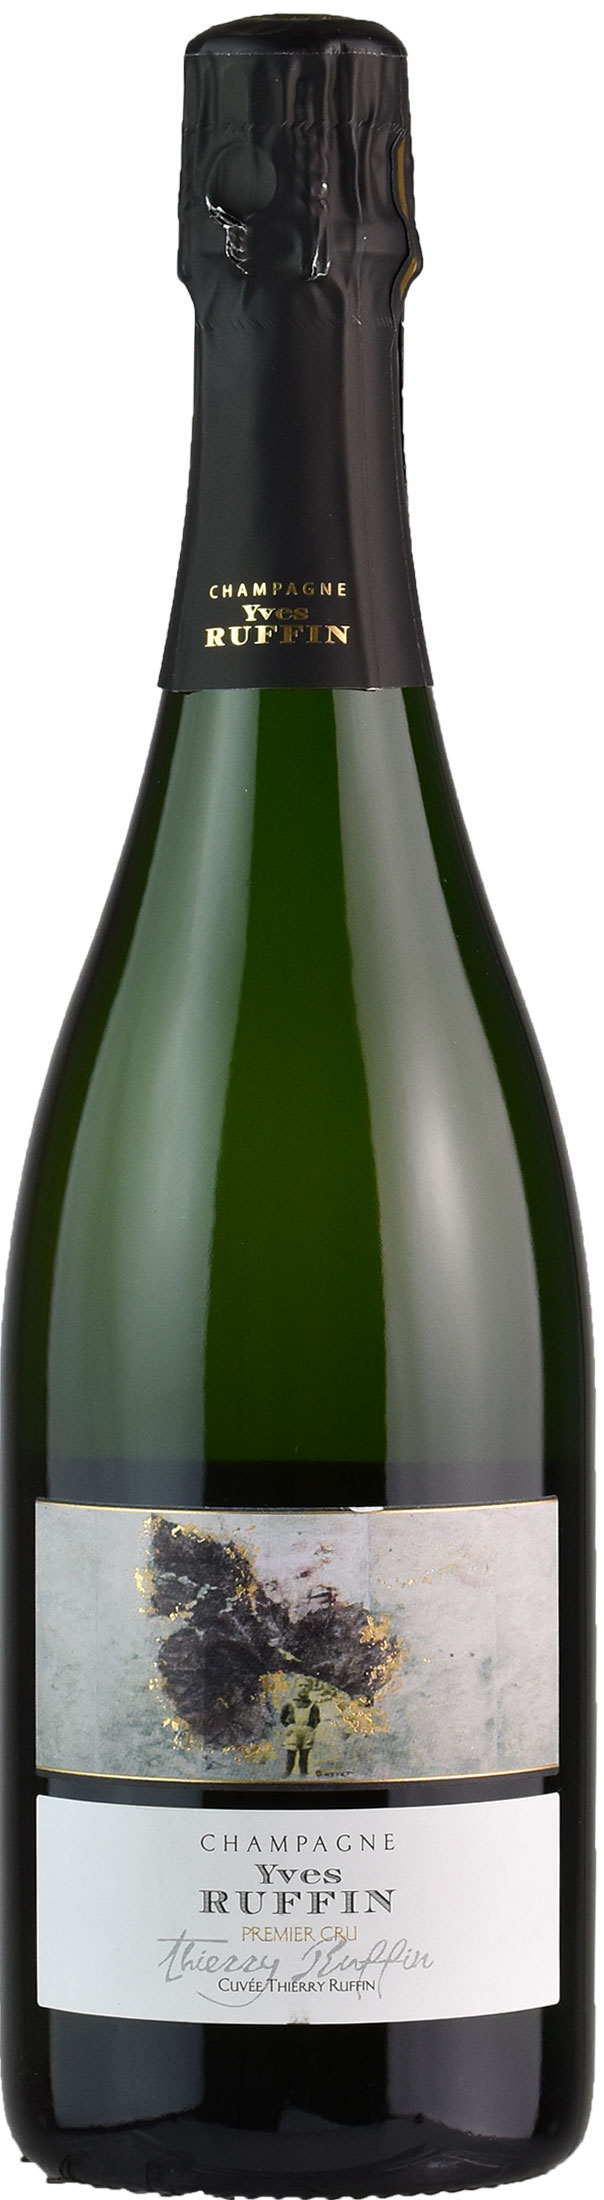 Ruffin Yves Ruffin Champagne Cuvee Thierry Ruffin Extra Brut 2006